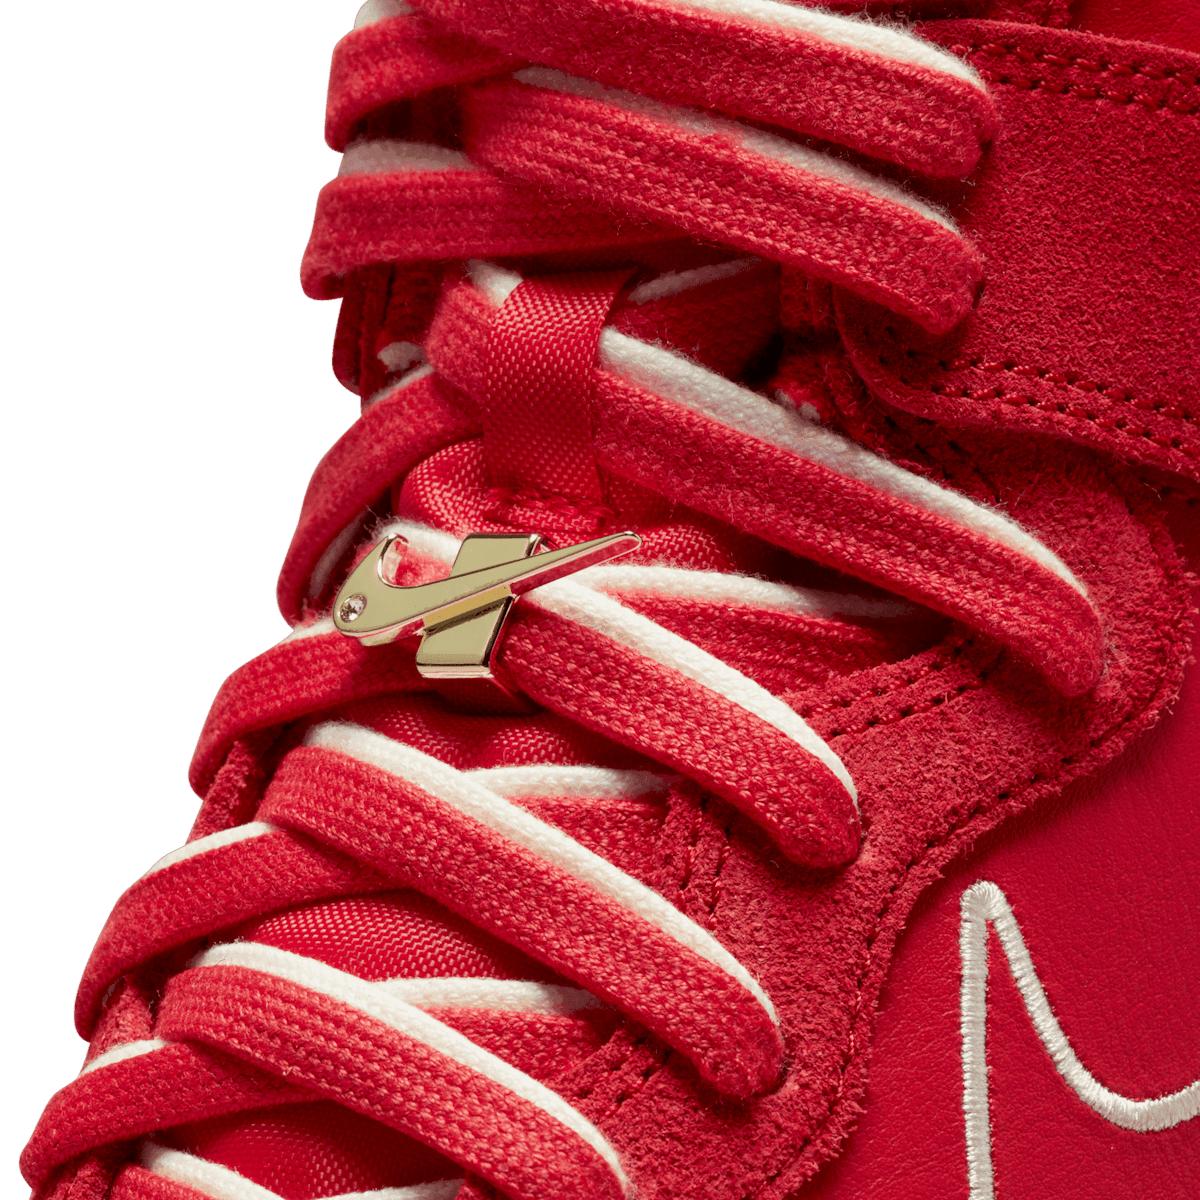 Nike Dunk High First Use Red - DH0960-600 Raffles and Release Date